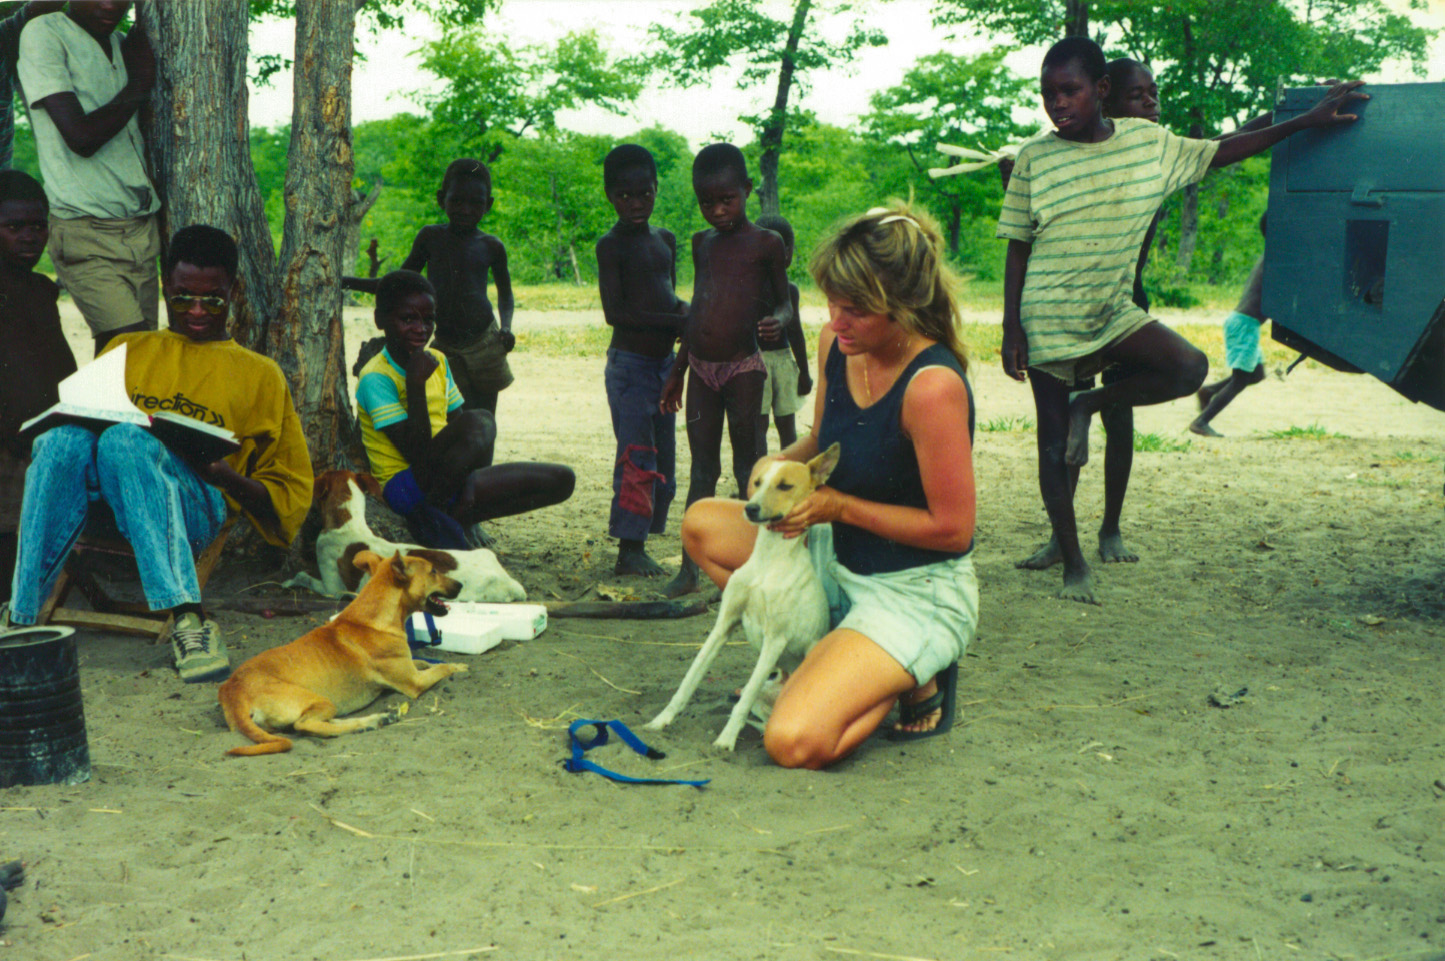 Kathleen Alexander examined how human behavior influences disease transmission between domestic and wild dogs in Africa.